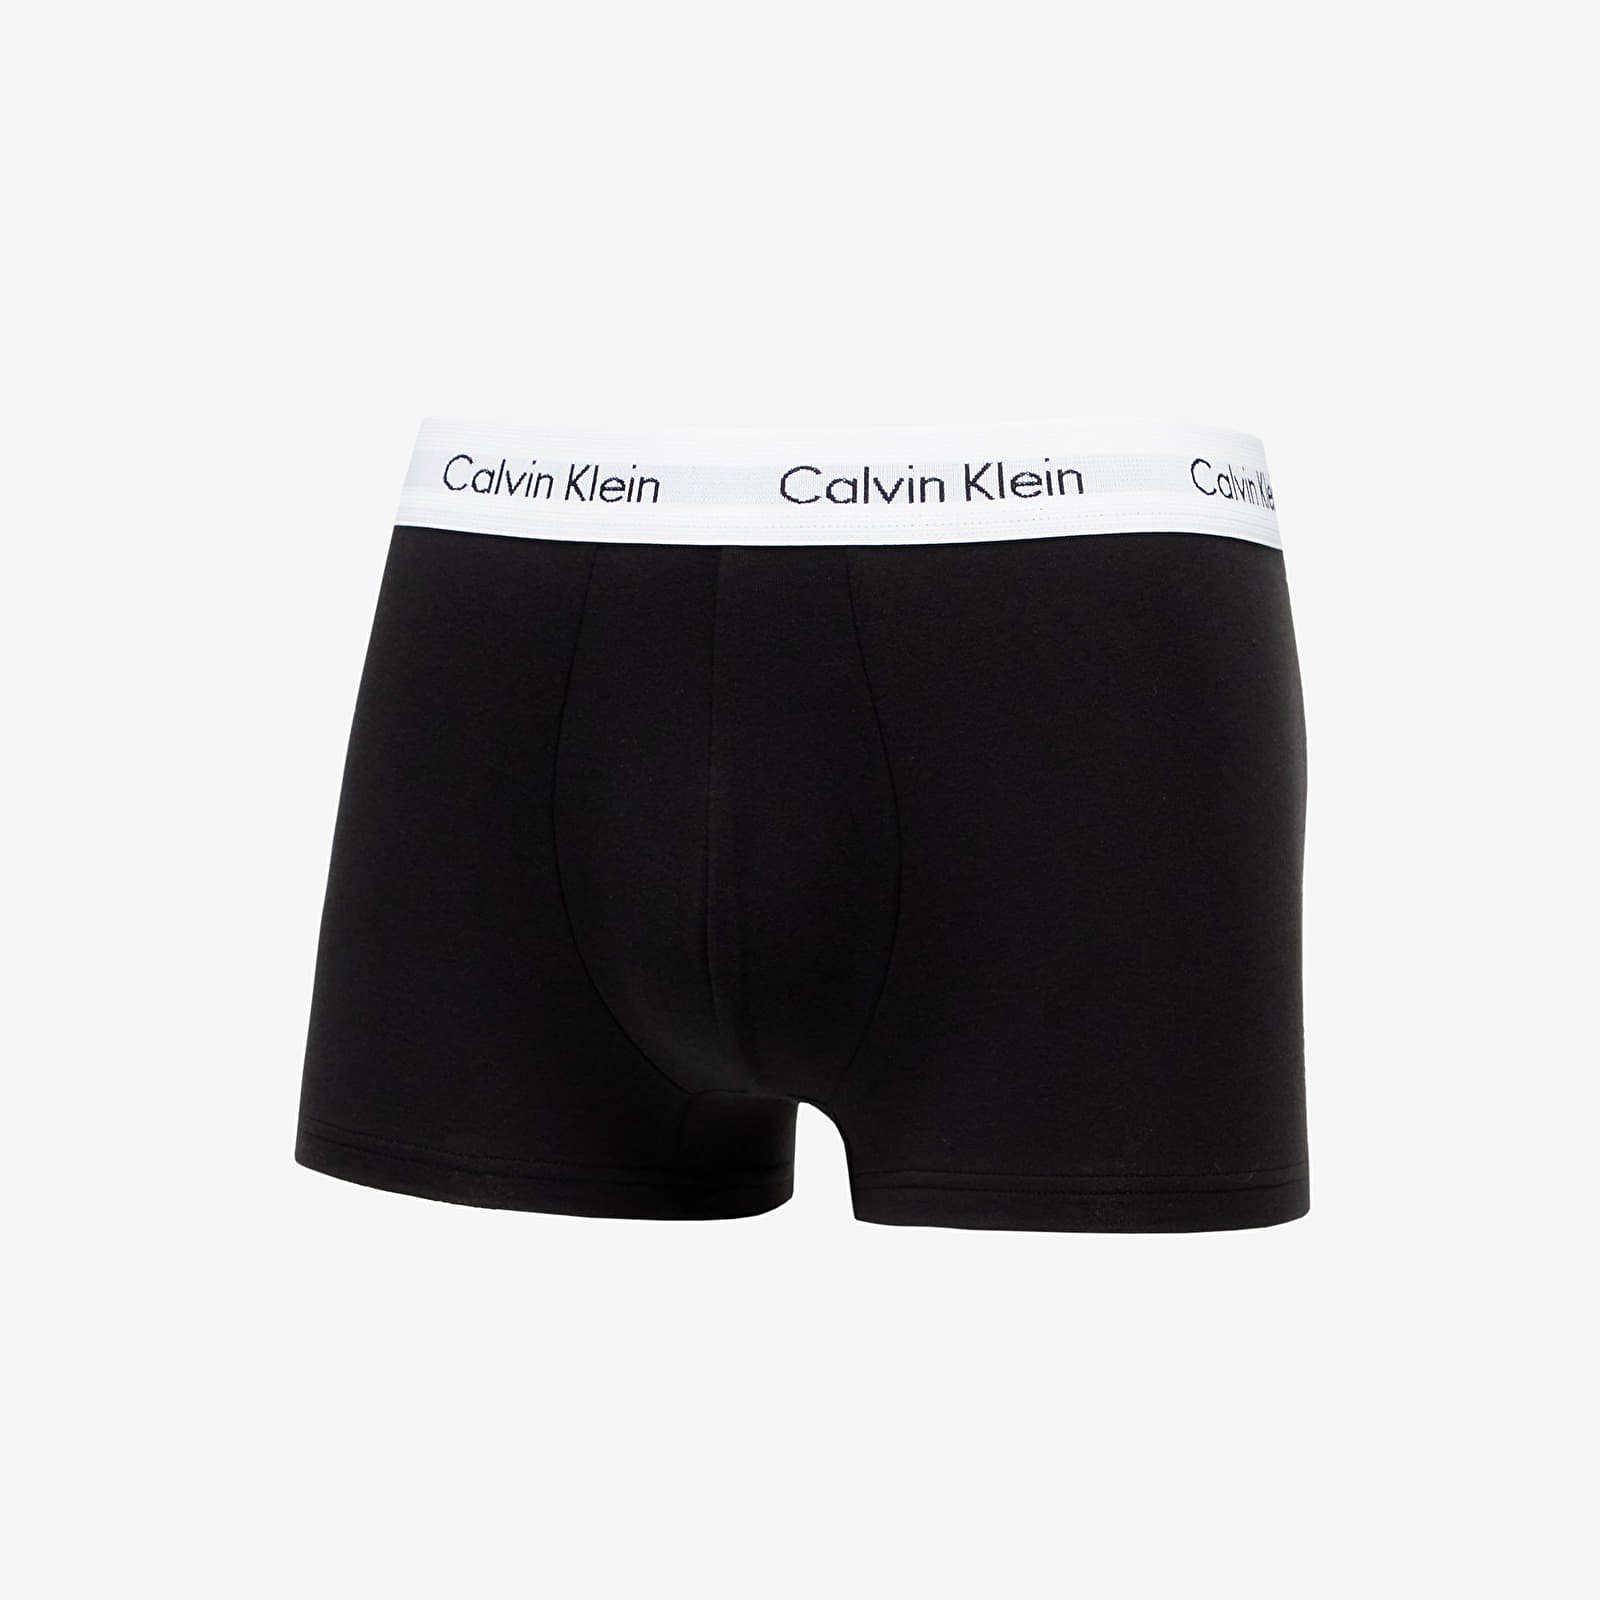 Boxer shorts Calvin Klein Cotton Stretch Low Rise Trunk 3 Pack